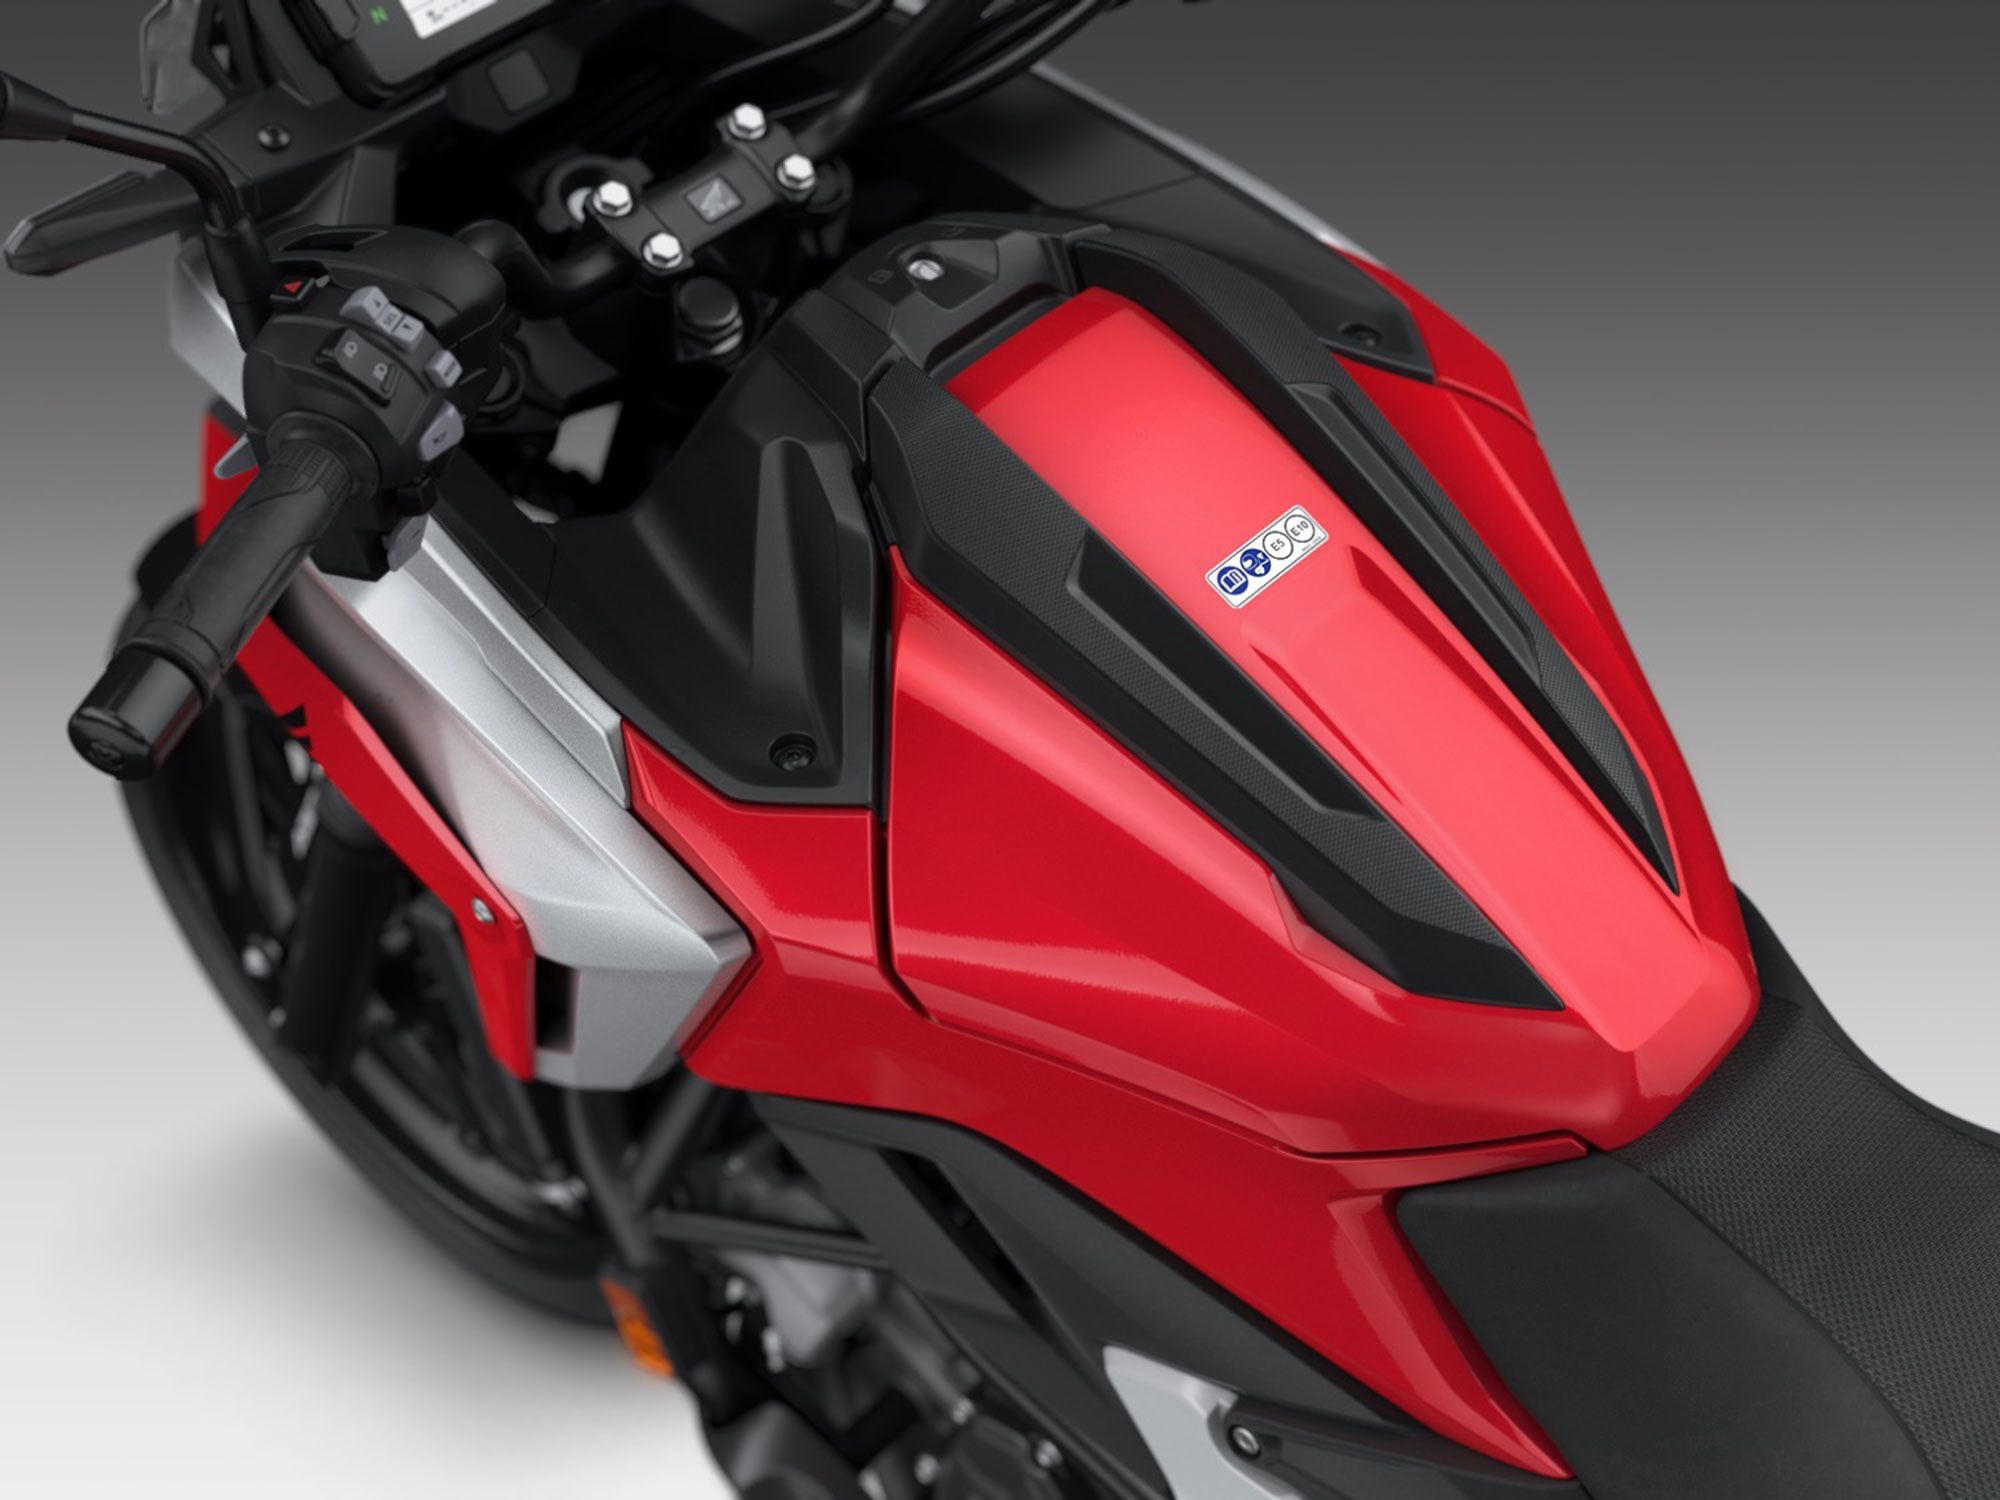 Honda increased the storage capacity on the NC750X for 2021.